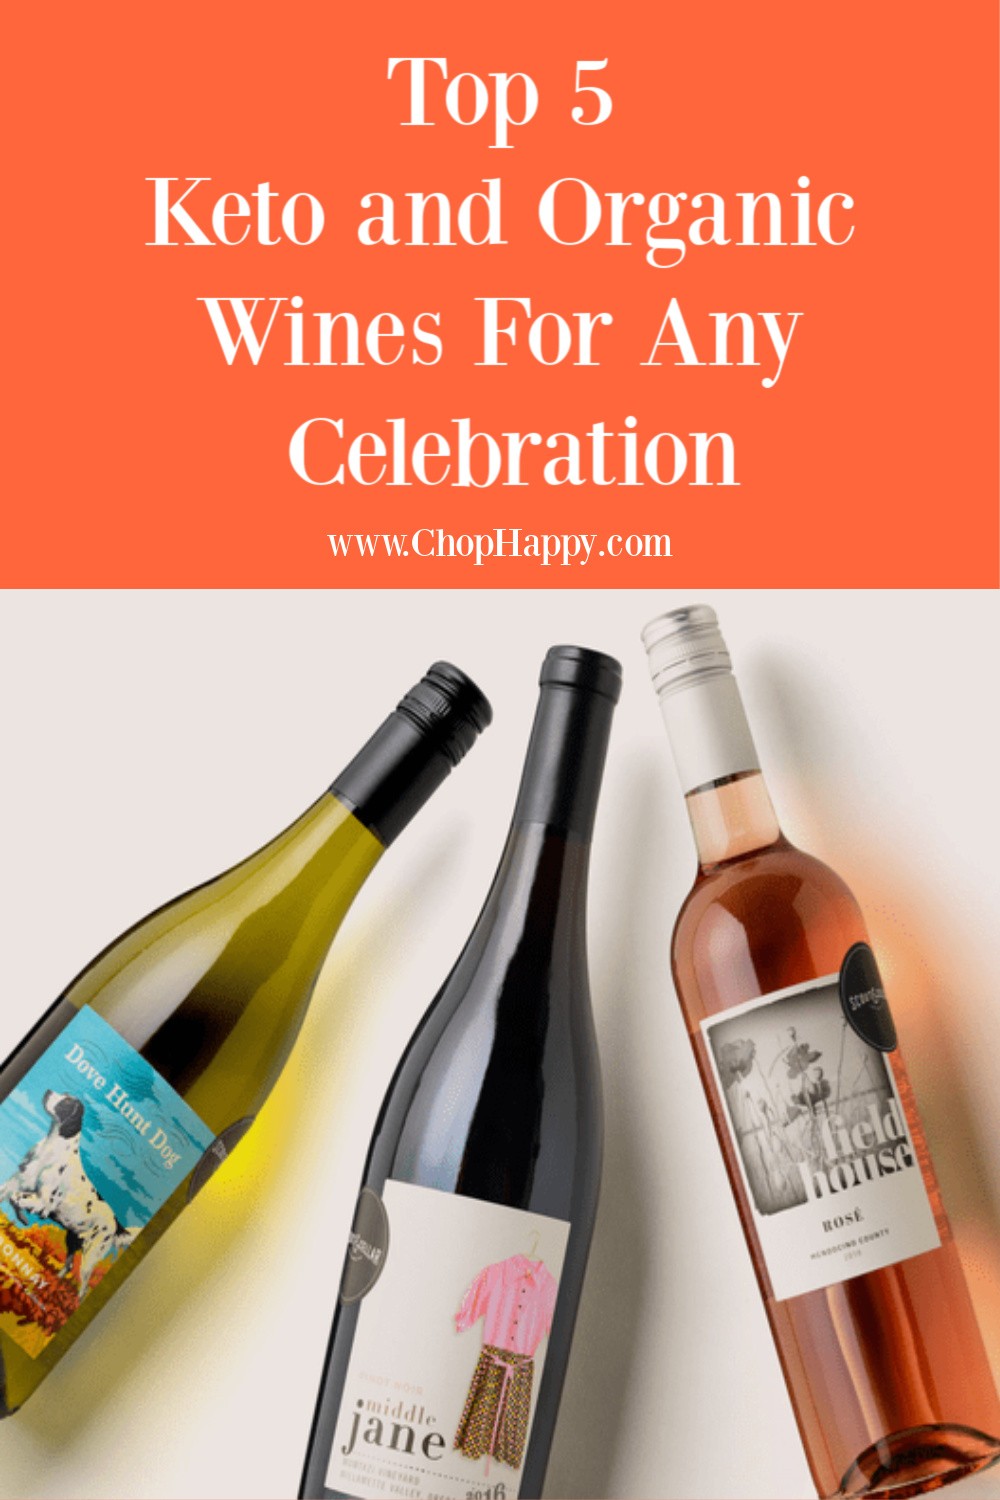 Top 5 Keto and Organic Wines For Any Celebration #keto #Ketowines